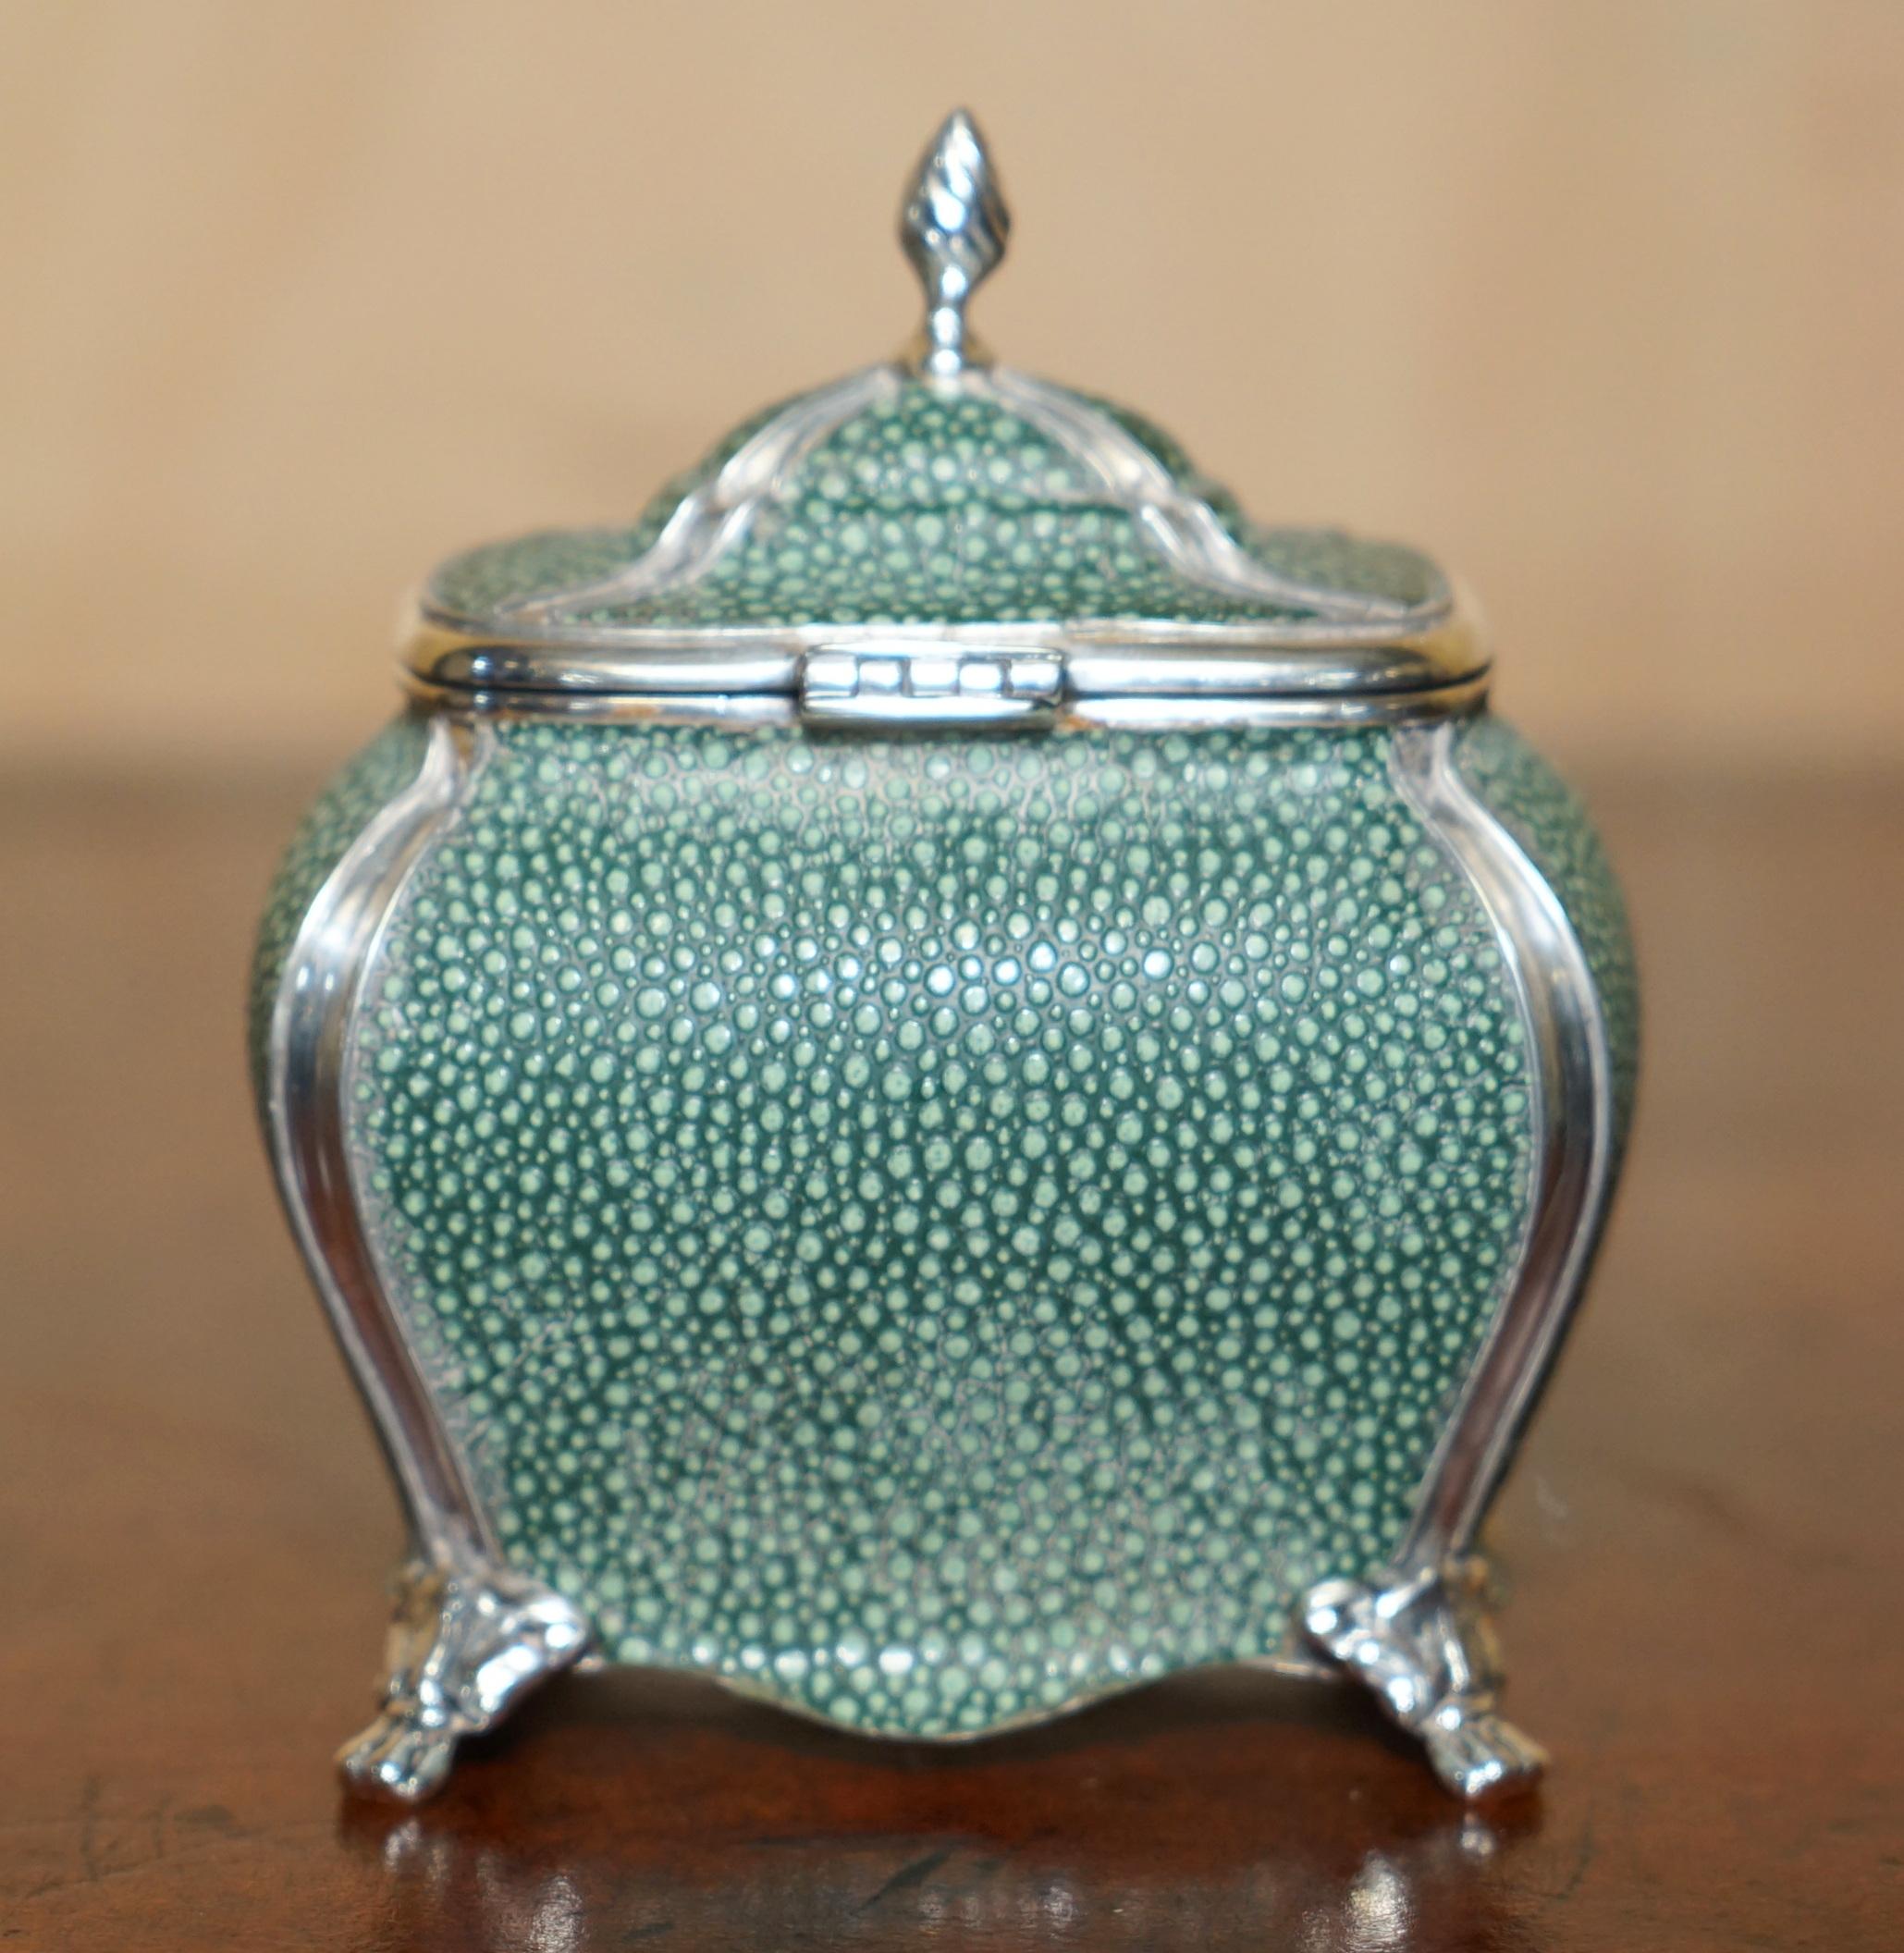 English FINE ANTIQUE VICTORIAN 1895 NATHAN & HAYES SHAGREEN EPNS SiLVER TEA CADDY